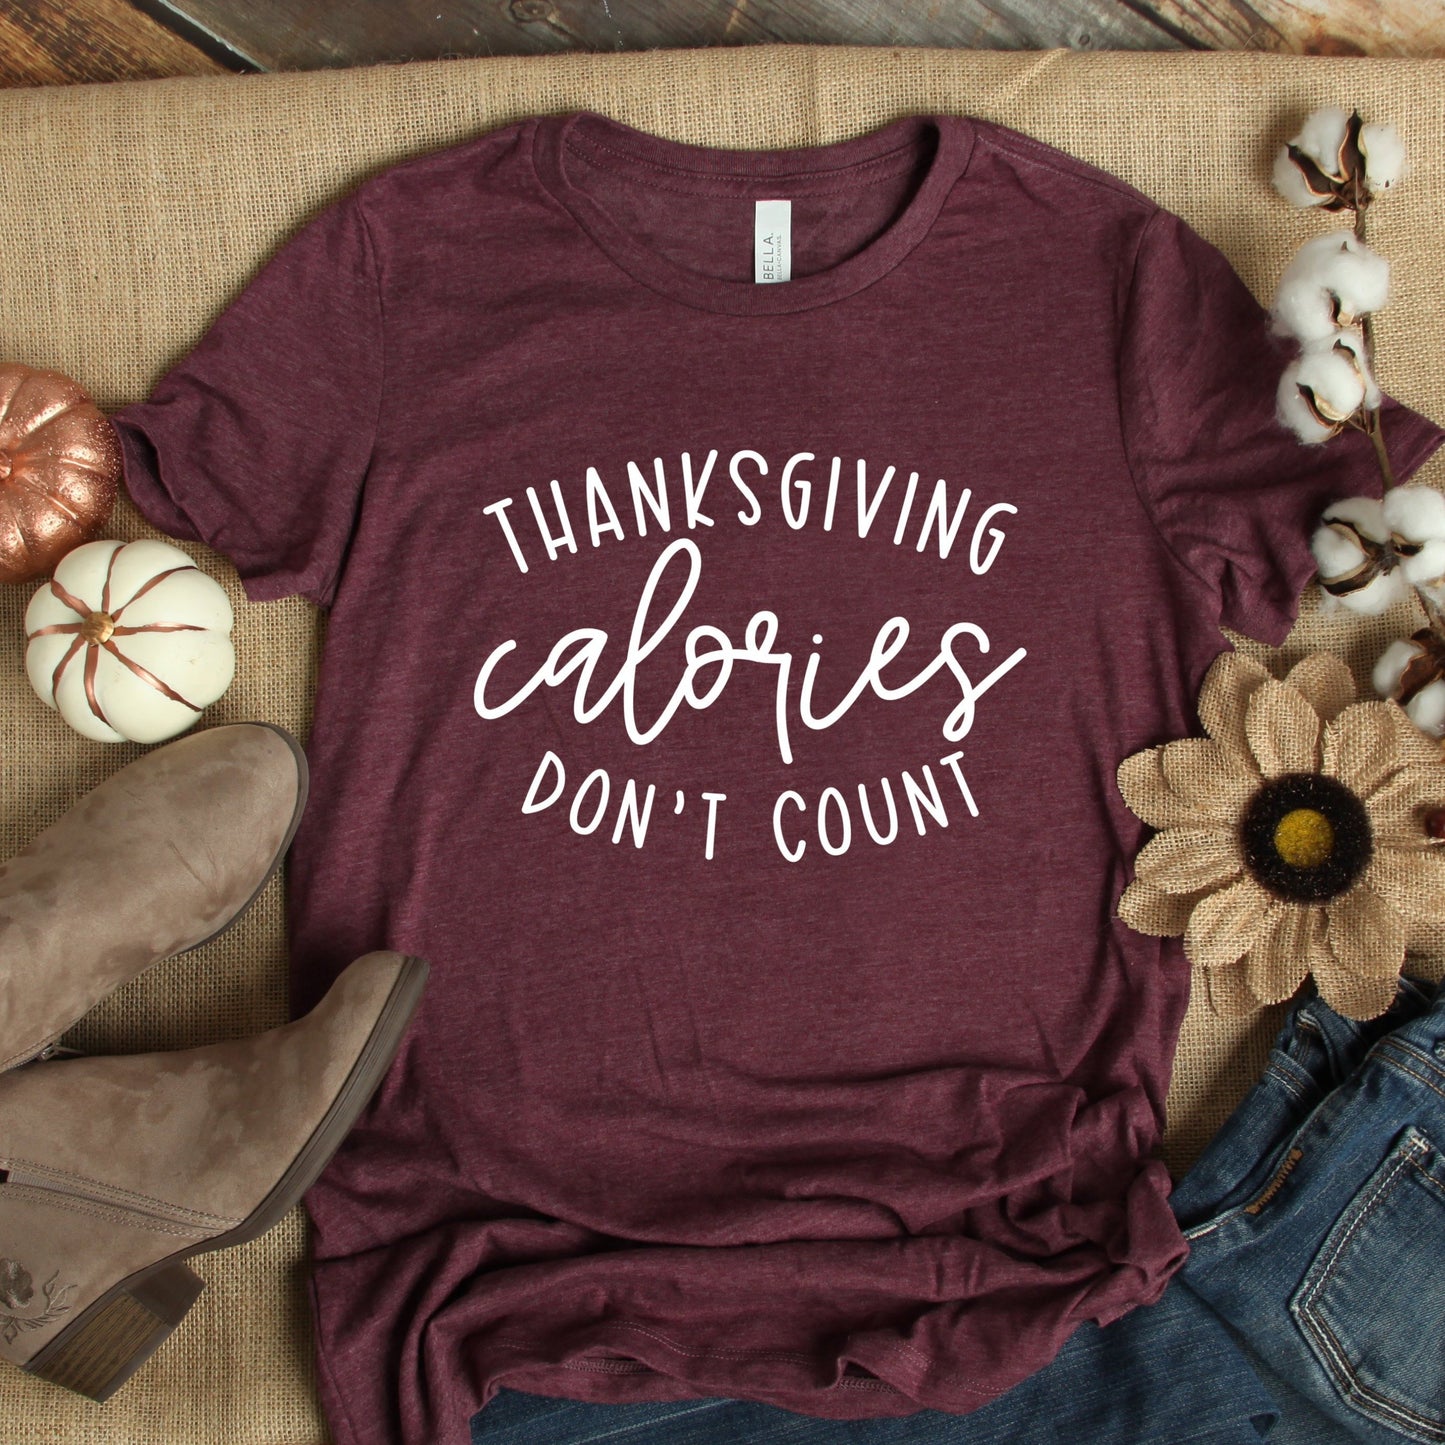 Thanksgiving calories don't count